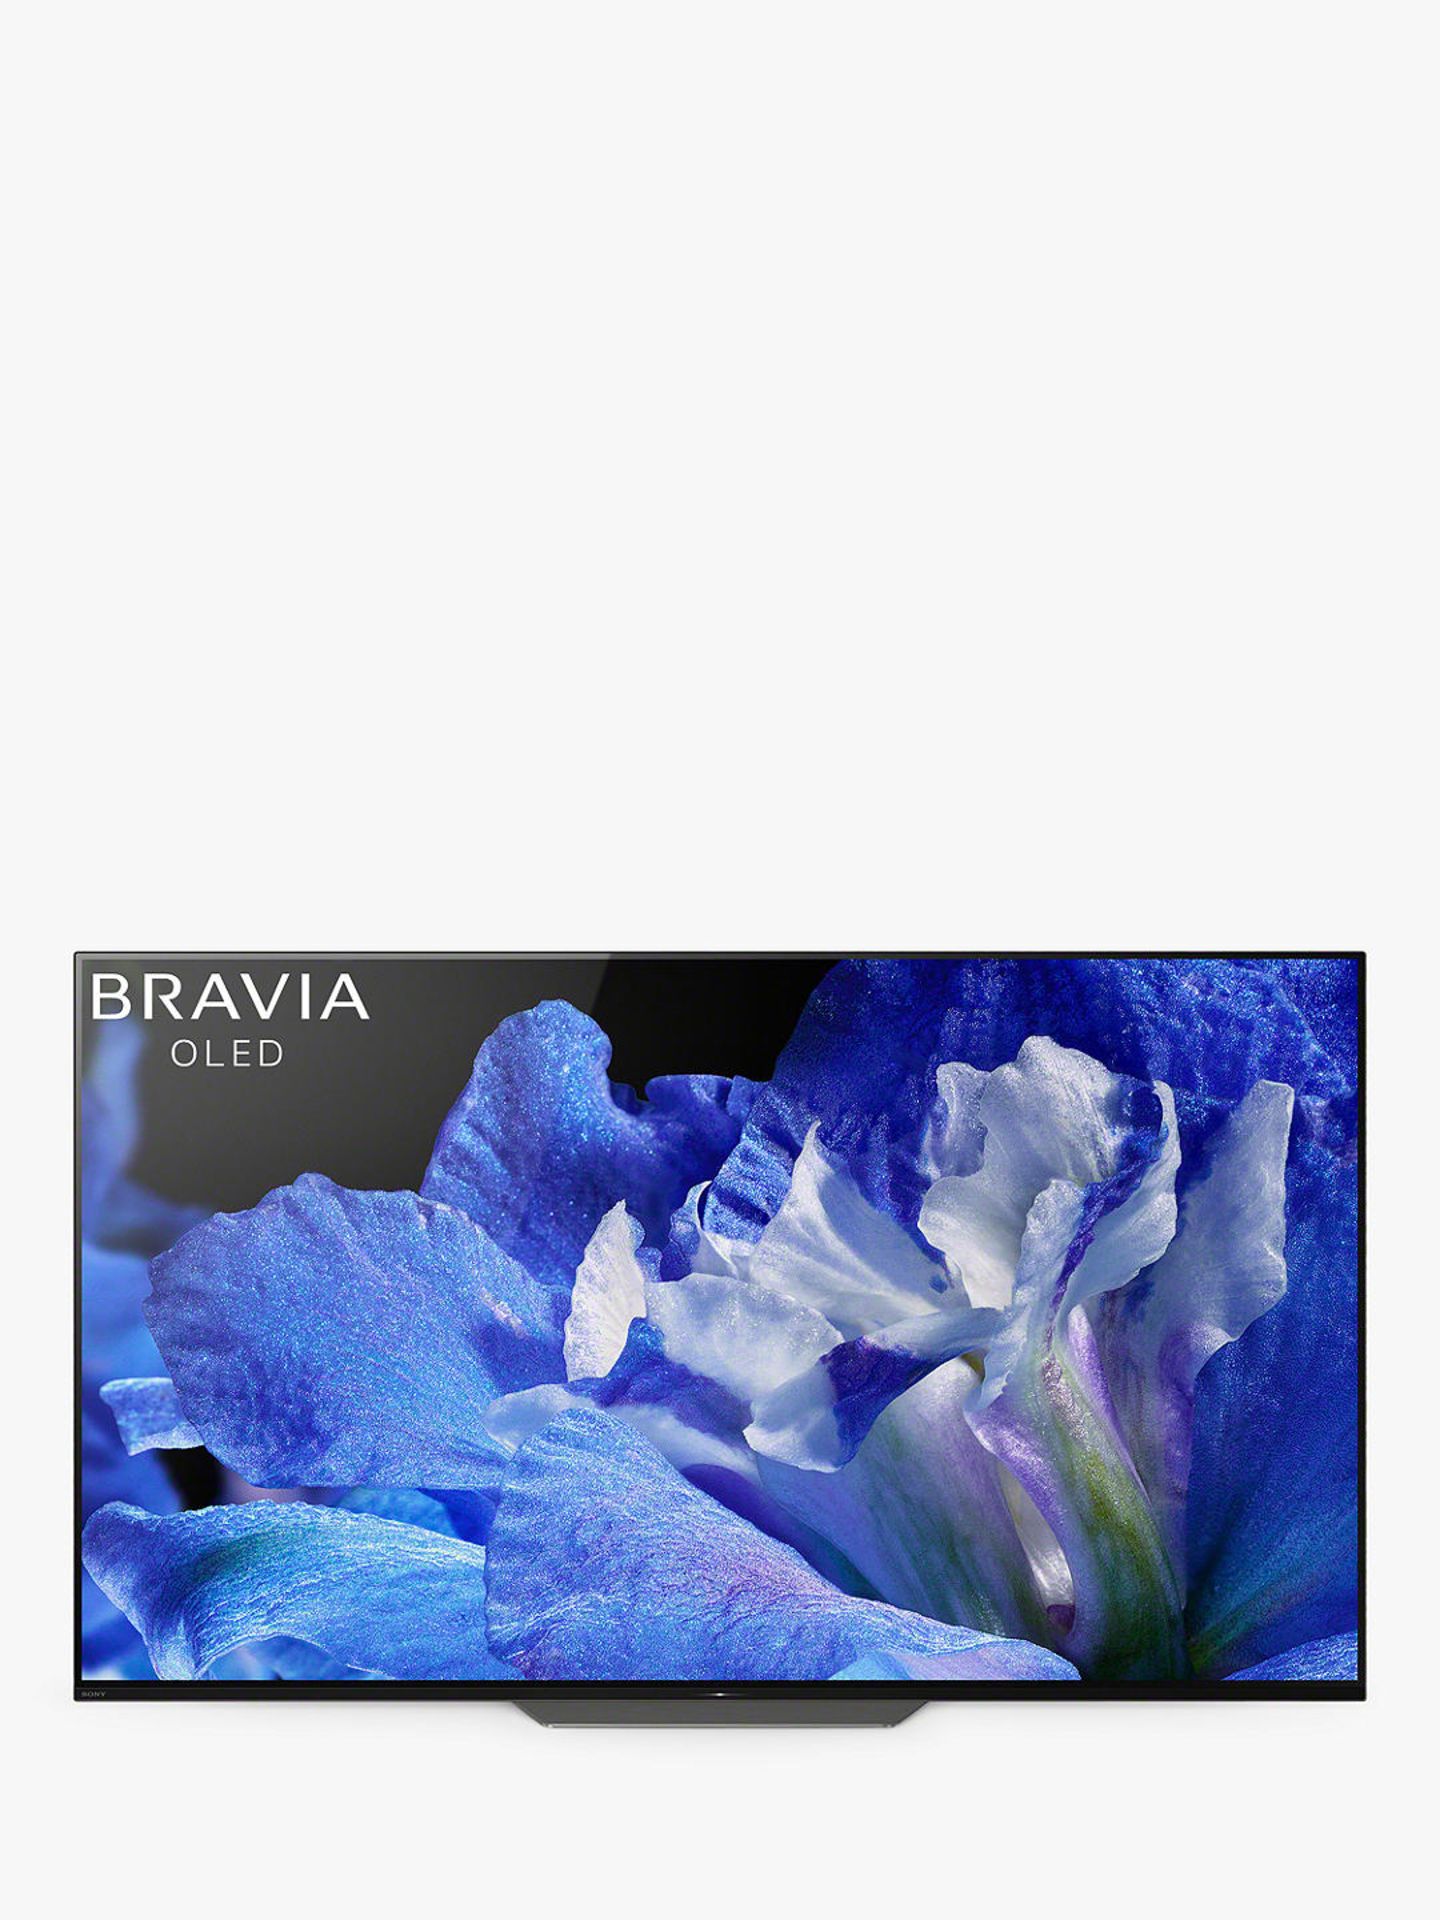 1 BOXED SONY BRAVIA KD-65AF8 65" OLED 4K ULTRA HD ANDROID SMART TV RRP £2799